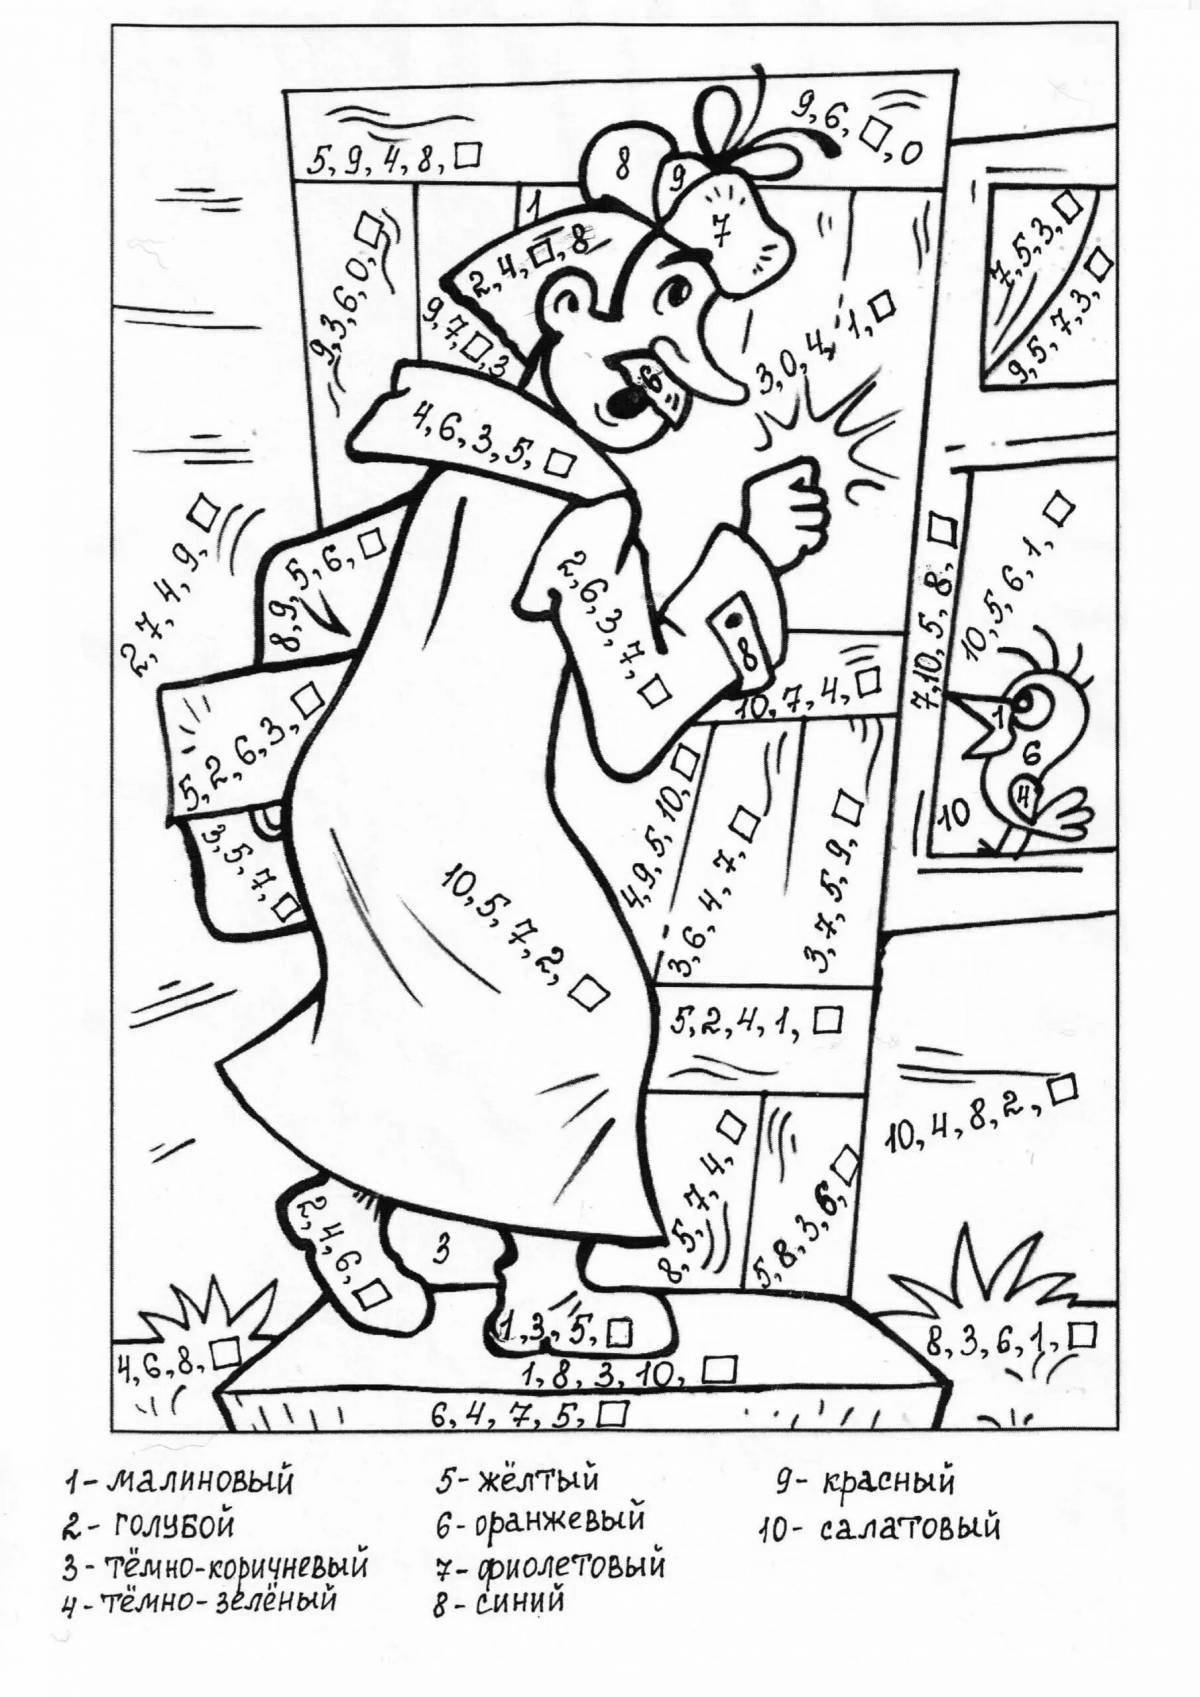 A fascinating coloring book Pechkin postman for children